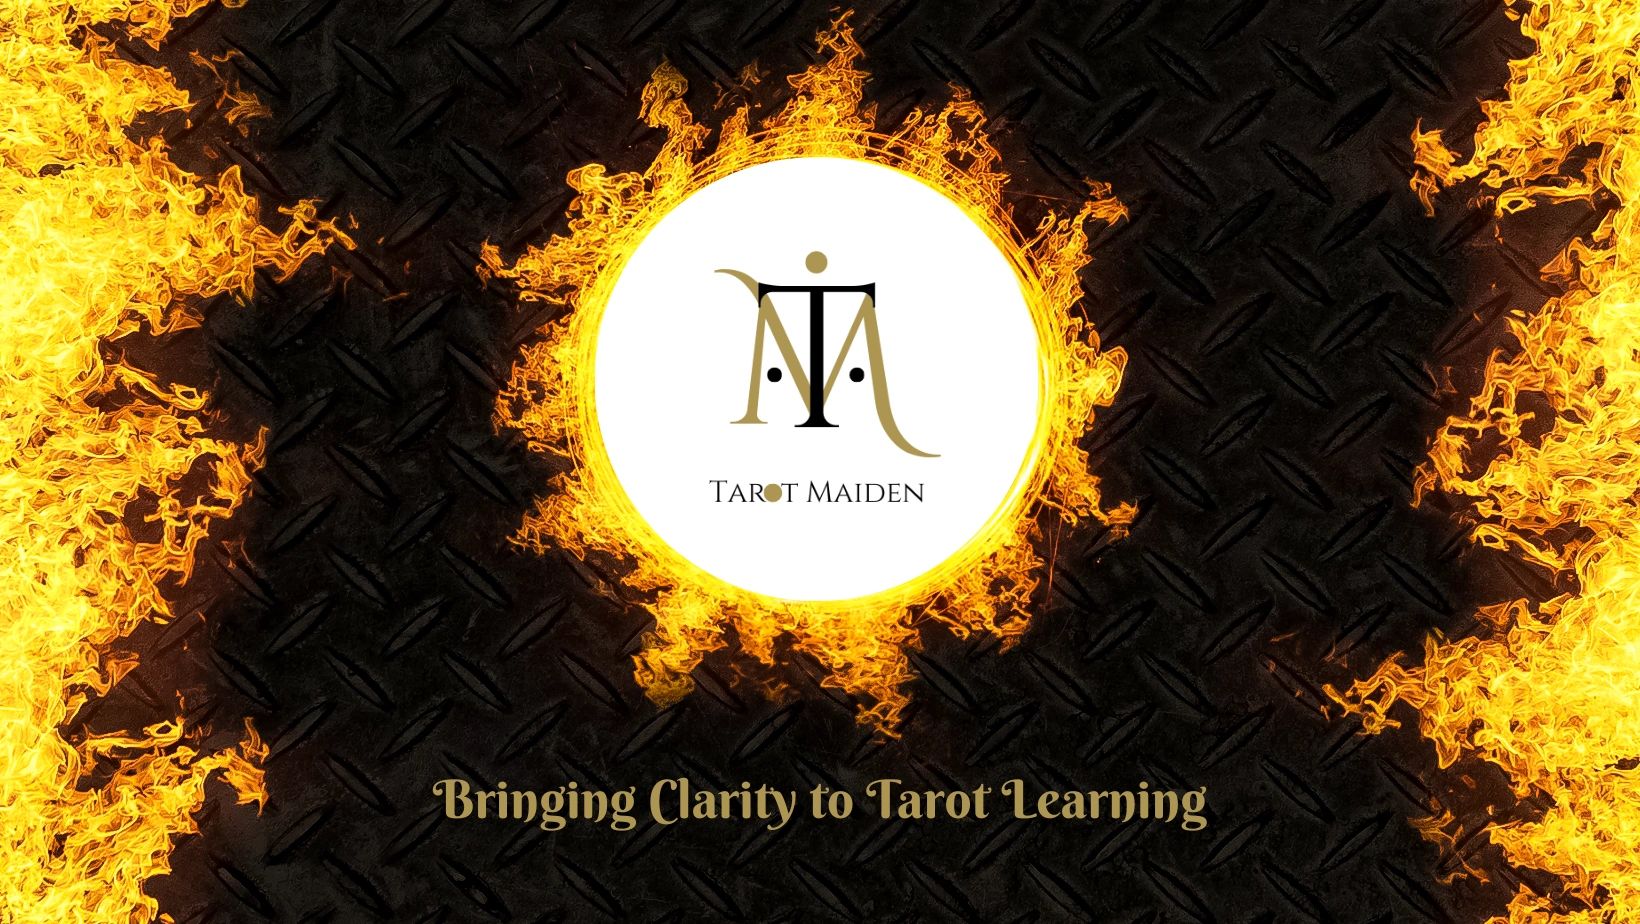 Tarot Maiden and a Fire Bringing Clarity to Tarot Learning